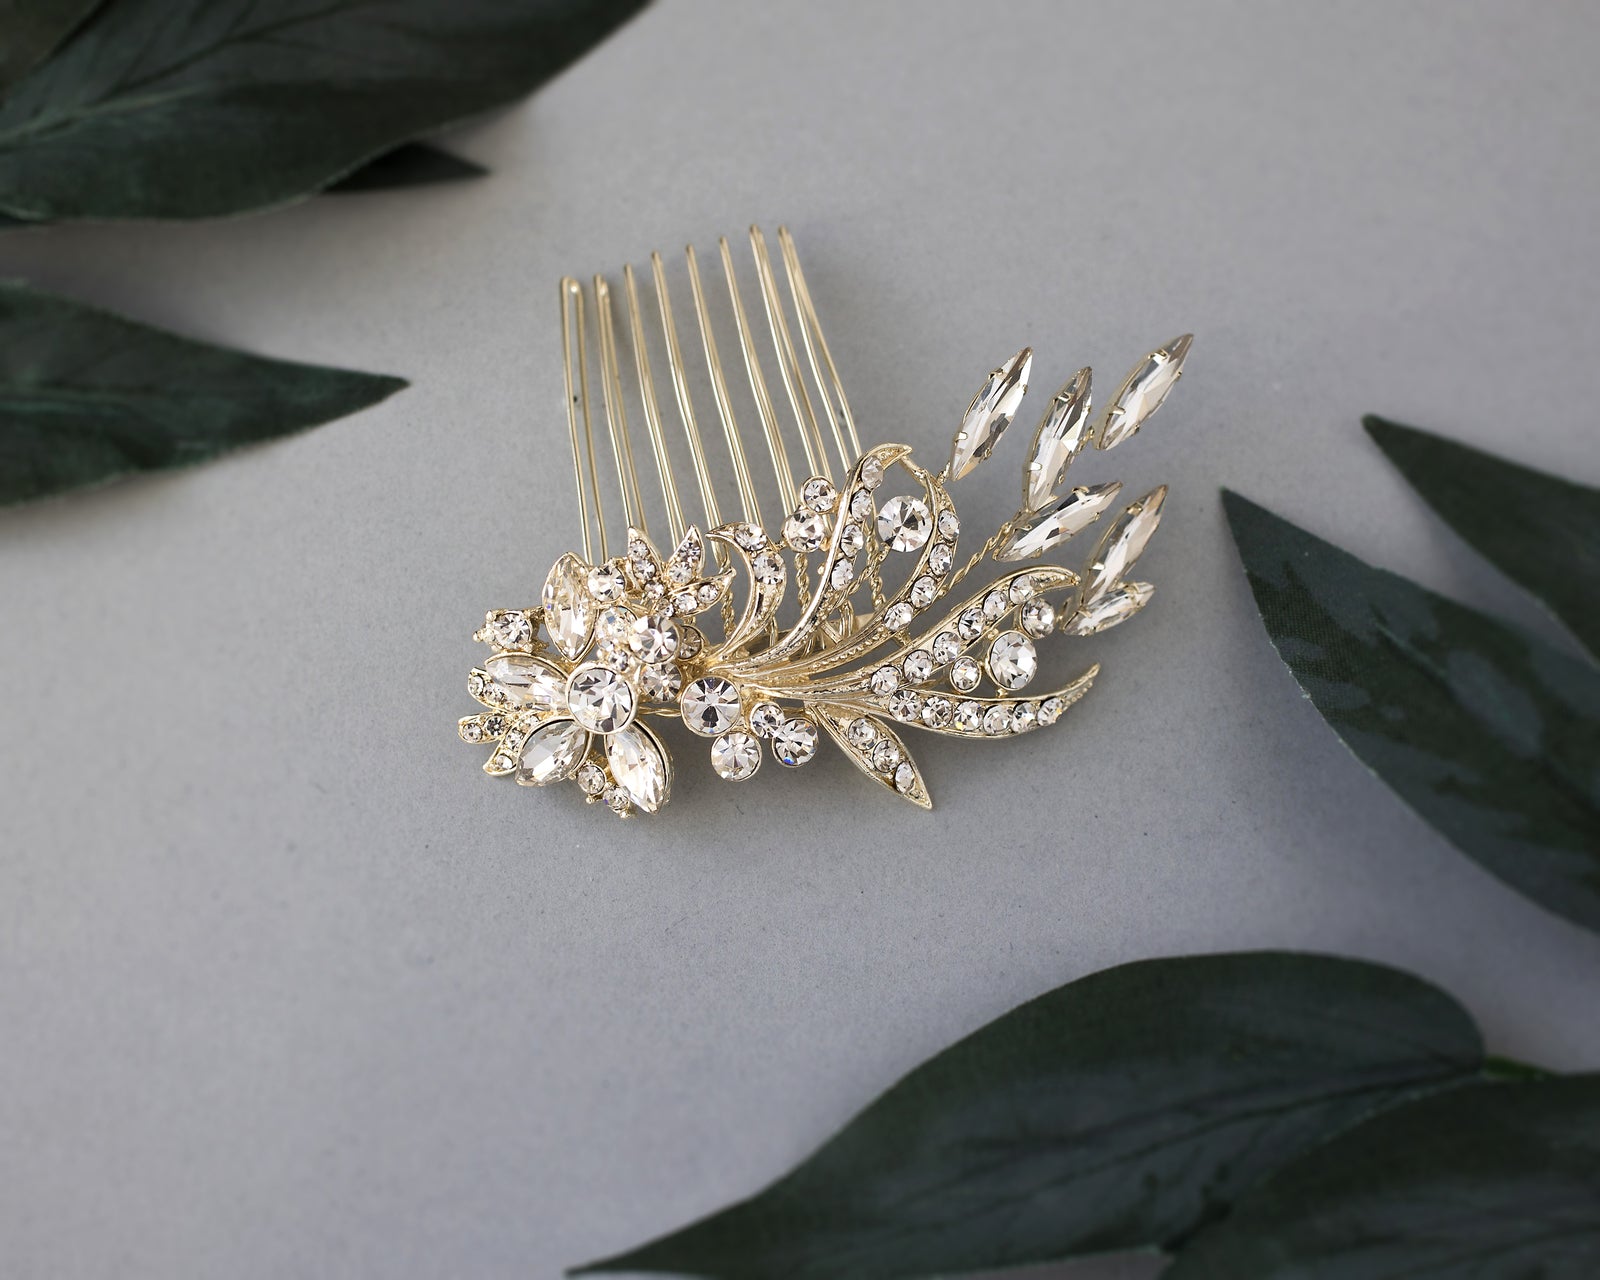 Bridal headpiece, hair accessory with flowers - Double flower and pearl  spray hair comb - Style #977 | Twigs & Honey ®, LLC